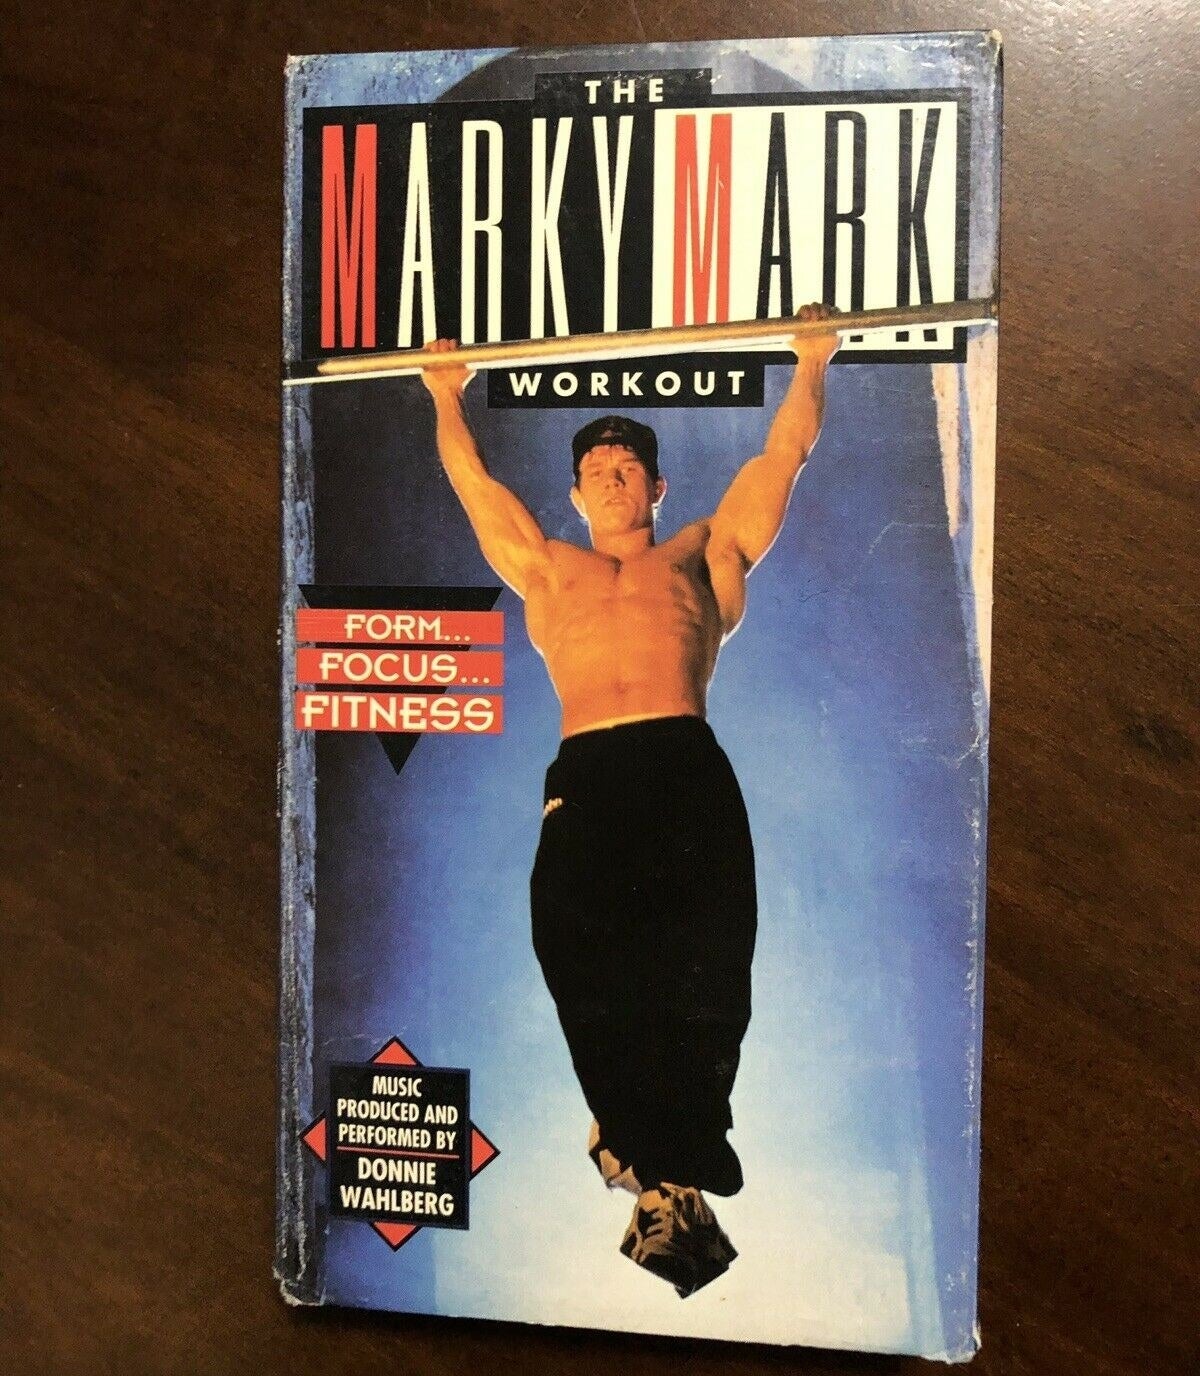 A cover featuring Mark doing a pull-up